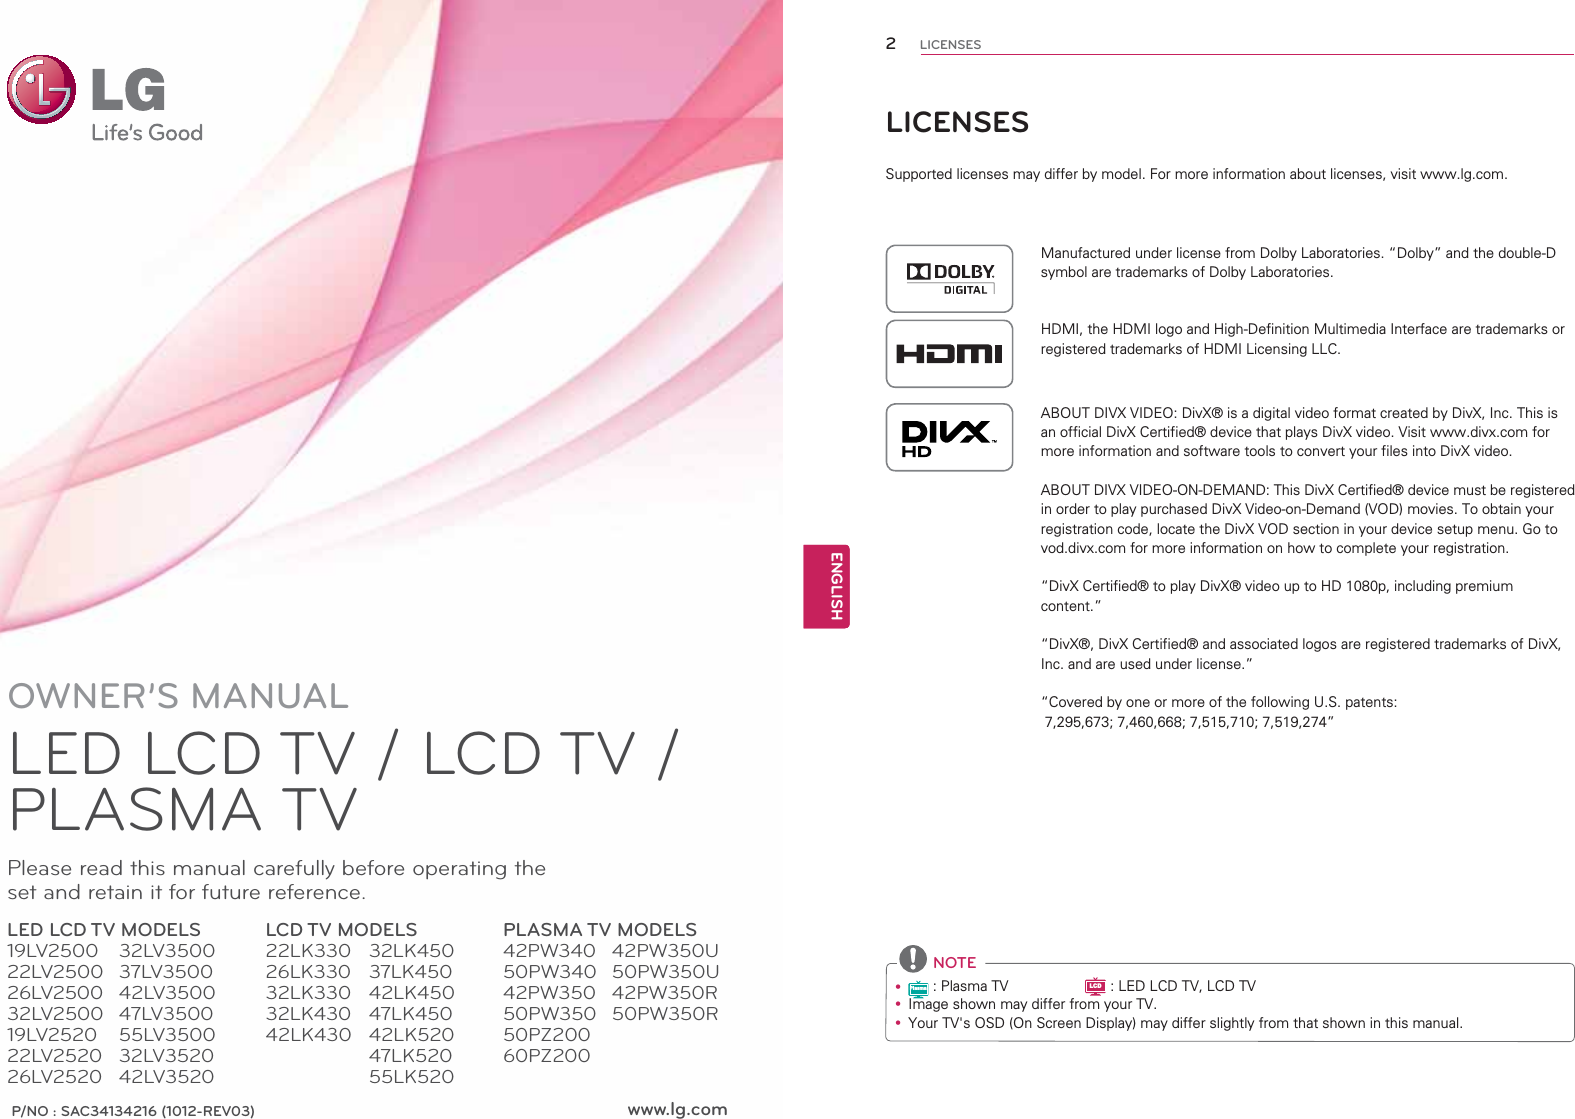 www.lg.comP/NO : SAC34134216 (1012-REV03)OWNER’S MANUALLED LCD TV / LCD TV / PLASMA TVPlease read this manual carefully before operating the set and retain it for future reference.LED LCD TV MODELS19LV250022LV250026LV250032LV250019LV252022LV252026LV2520LCD TV MODELS22LK33026LK33032LK33032LK43042LK430PLASMA TV MODELS42PW34050PW34042PW35050PW35050PZ20060PZ20032LV350037LV350042LV350047LV350055LV350032LV352042LV352032LK45037LK45042LK45047LK45042LK52047LK52055LK52042PW350U50PW350U42PW350R50PW350R2ENGENGLISHLICENSESLICENSESSupported licenses may differ by model. For more information about licenses, visit www.lg.com.Manufactured under license from Dolby Laboratories. “Dolby” and the double-D symbol are trademarks of Dolby Laboratories.HDMI, the HDMI logo and High-Definition Multimedia Interface are trademarks or registered trademarks of HDMI Licensing LLC.ABOUT DIVX VIDEO: DivX® is a digital video format created by DivX, Inc. This is an official DivX Certified® device that plays DivX video. Visit www.divx.com for more information and software tools to convert your files into DivX video.ABOUT DIVX VIDEO-ON-DEMAND: This DivX Certified® device must be registered in order to play purchased DivX Video-on-Demand (VOD) movies. To obtain your registration code, locate the DivX VOD section in your device setup menu. Go to vod.divx.com for more information on how to complete your registration. “DivX Certified® to play DivX® video up to HD 1080p, including premium content.”“DivX®, DivX Certified® and associated logos are registered trademarks of DivX, Inc. and are used under license.”“Covered by one or more of the following U.S. patents:   7,295,673; 7,460,668; 7,515,710; 7,519,274” NOTEyPlasma : Plasma TV                   LCD : LED LCD TV, LCD TVy Image shown may differ from your TV.y Your TV&apos;s OSD (On Screen Display) may differ slightly from that shown in this manual.